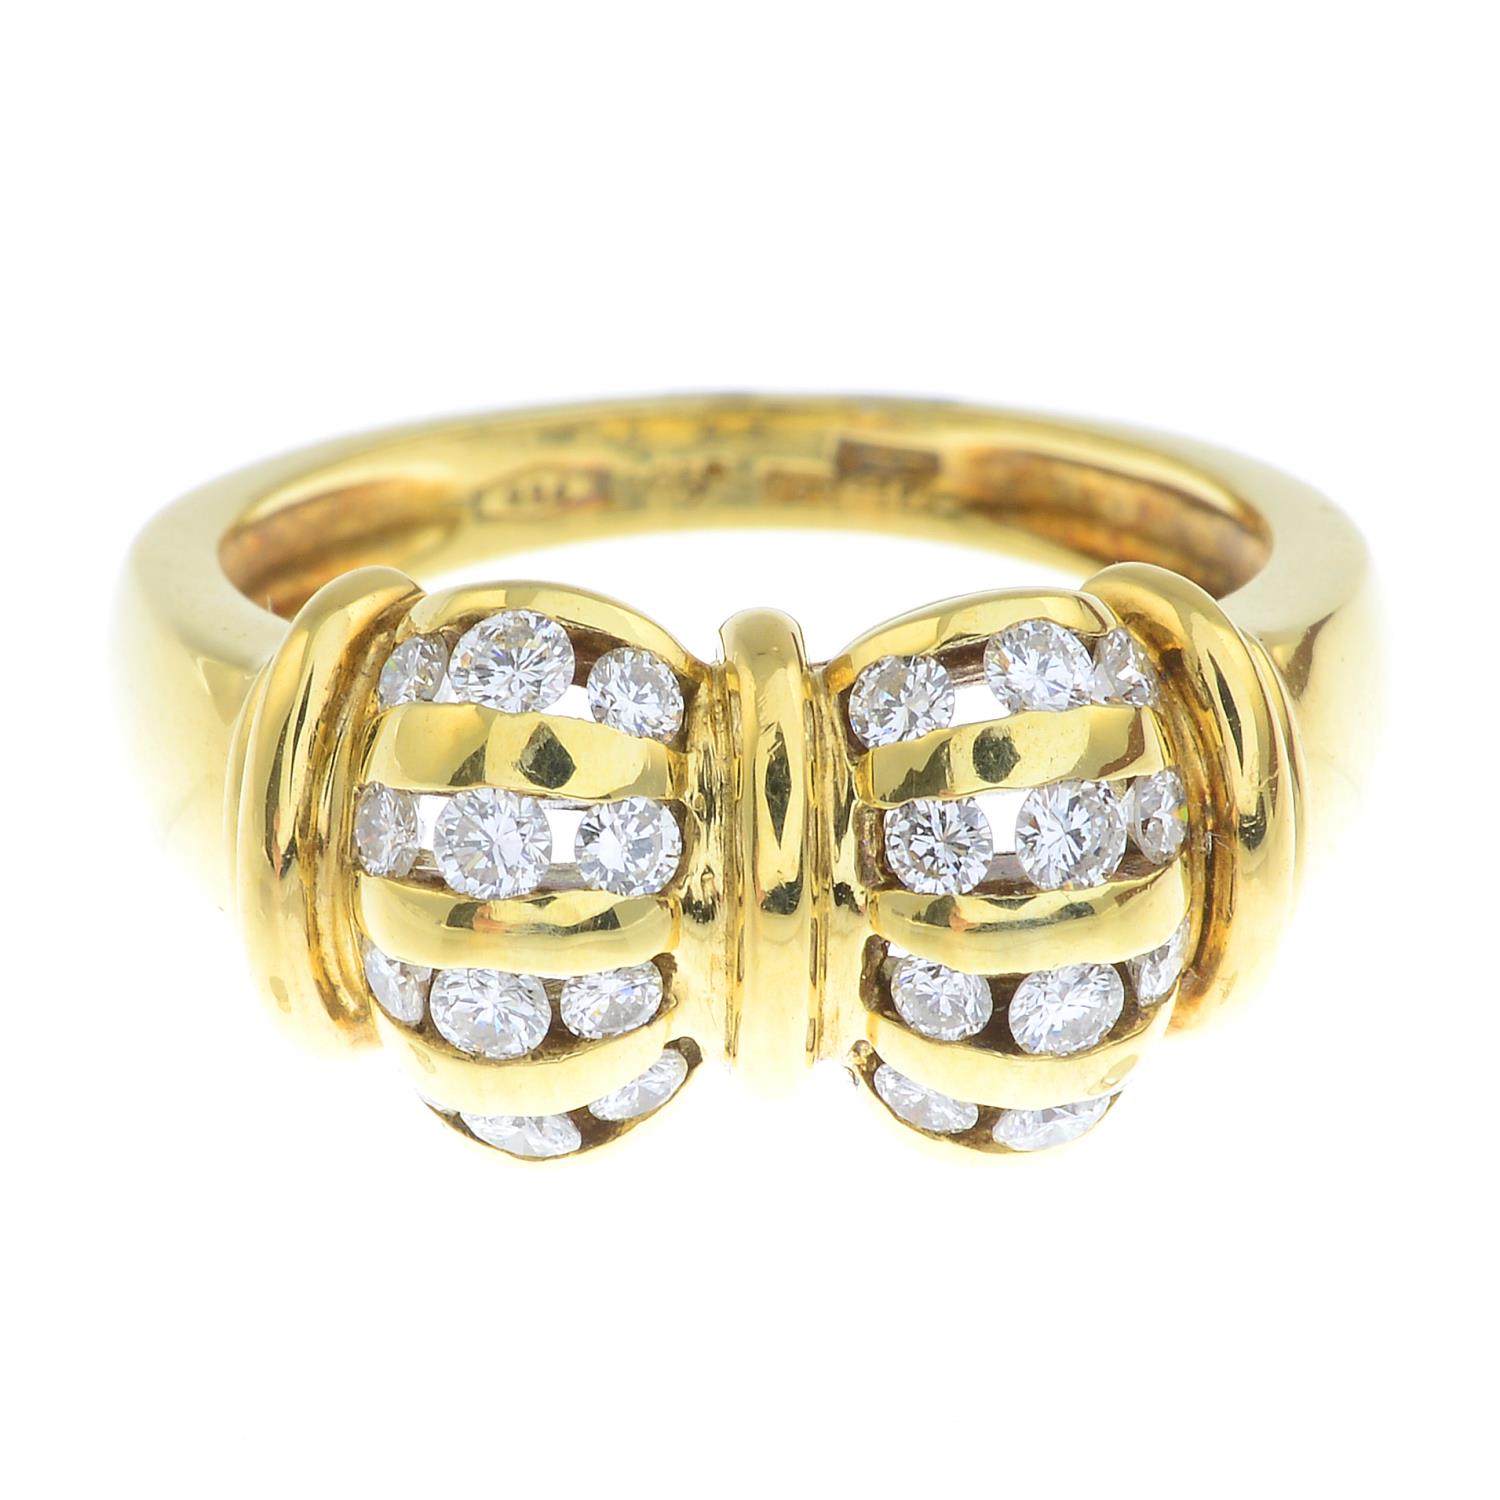 An 18ct gold diamond dress ring, depicting a bow.Estimated total diamond weight 0.55ct.